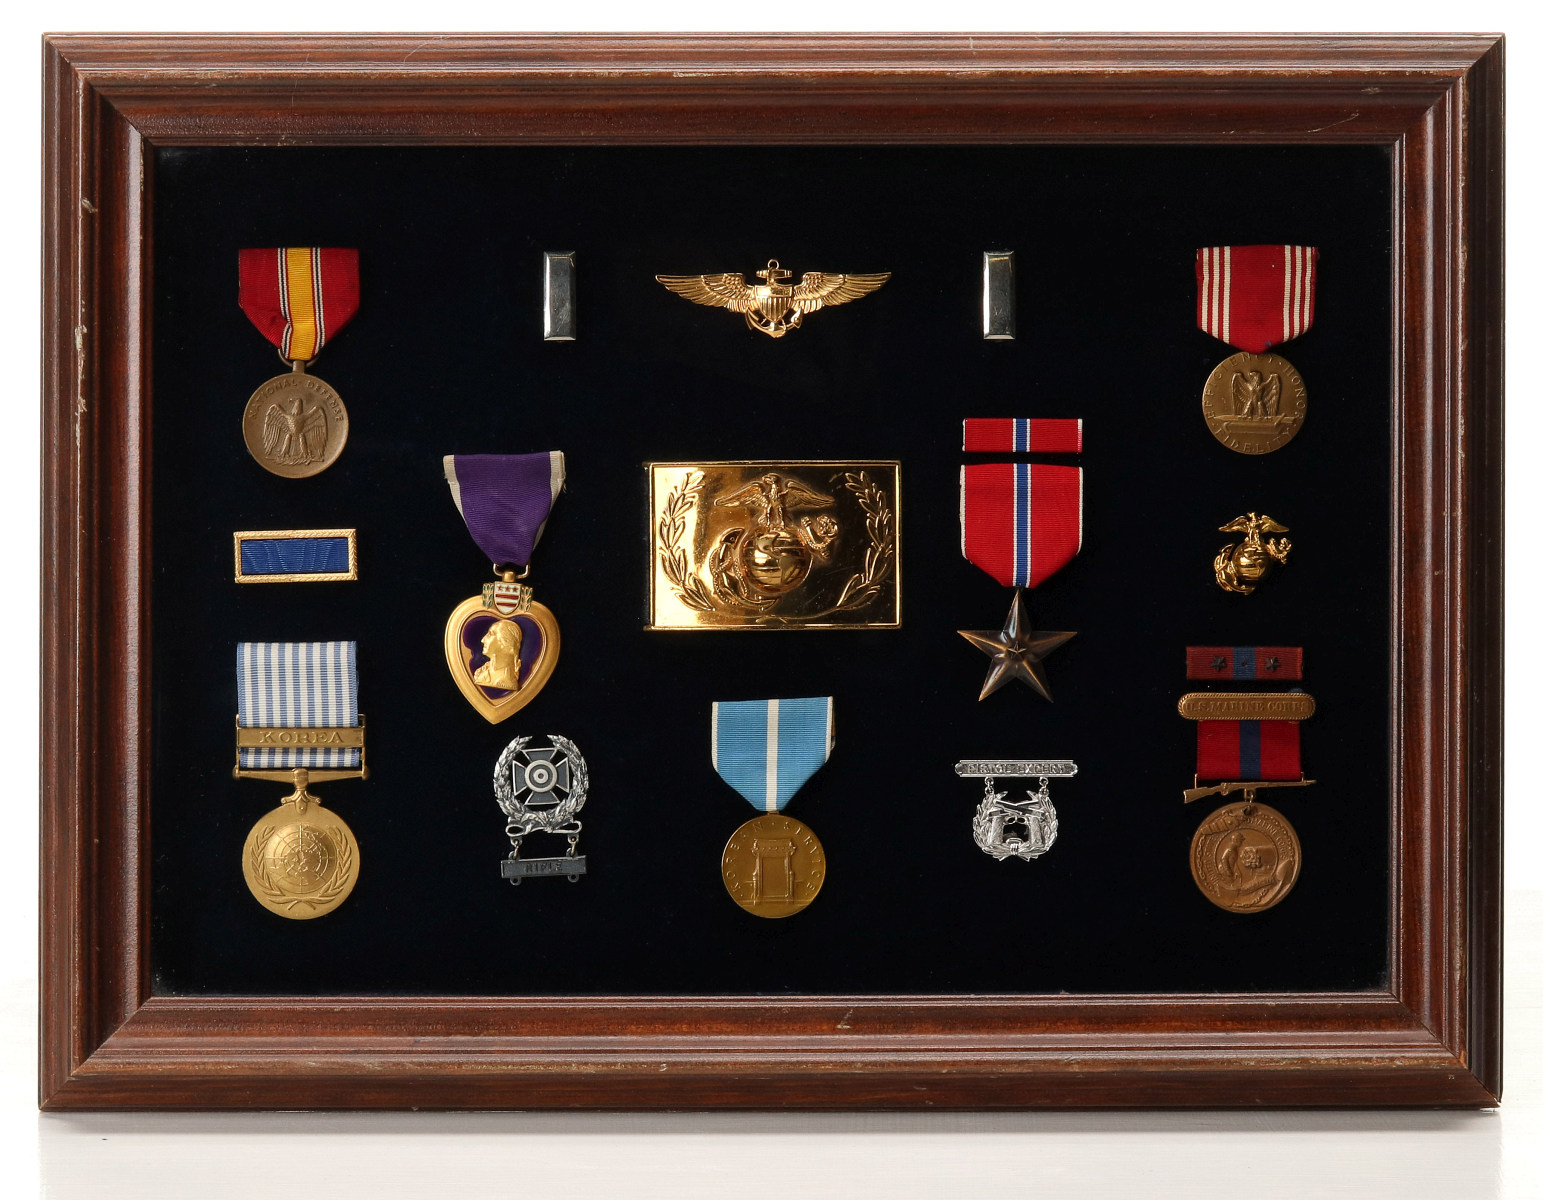 PURPLE HEART, BRONZE STAR, OTHERS FROM VET OF TWO WARS